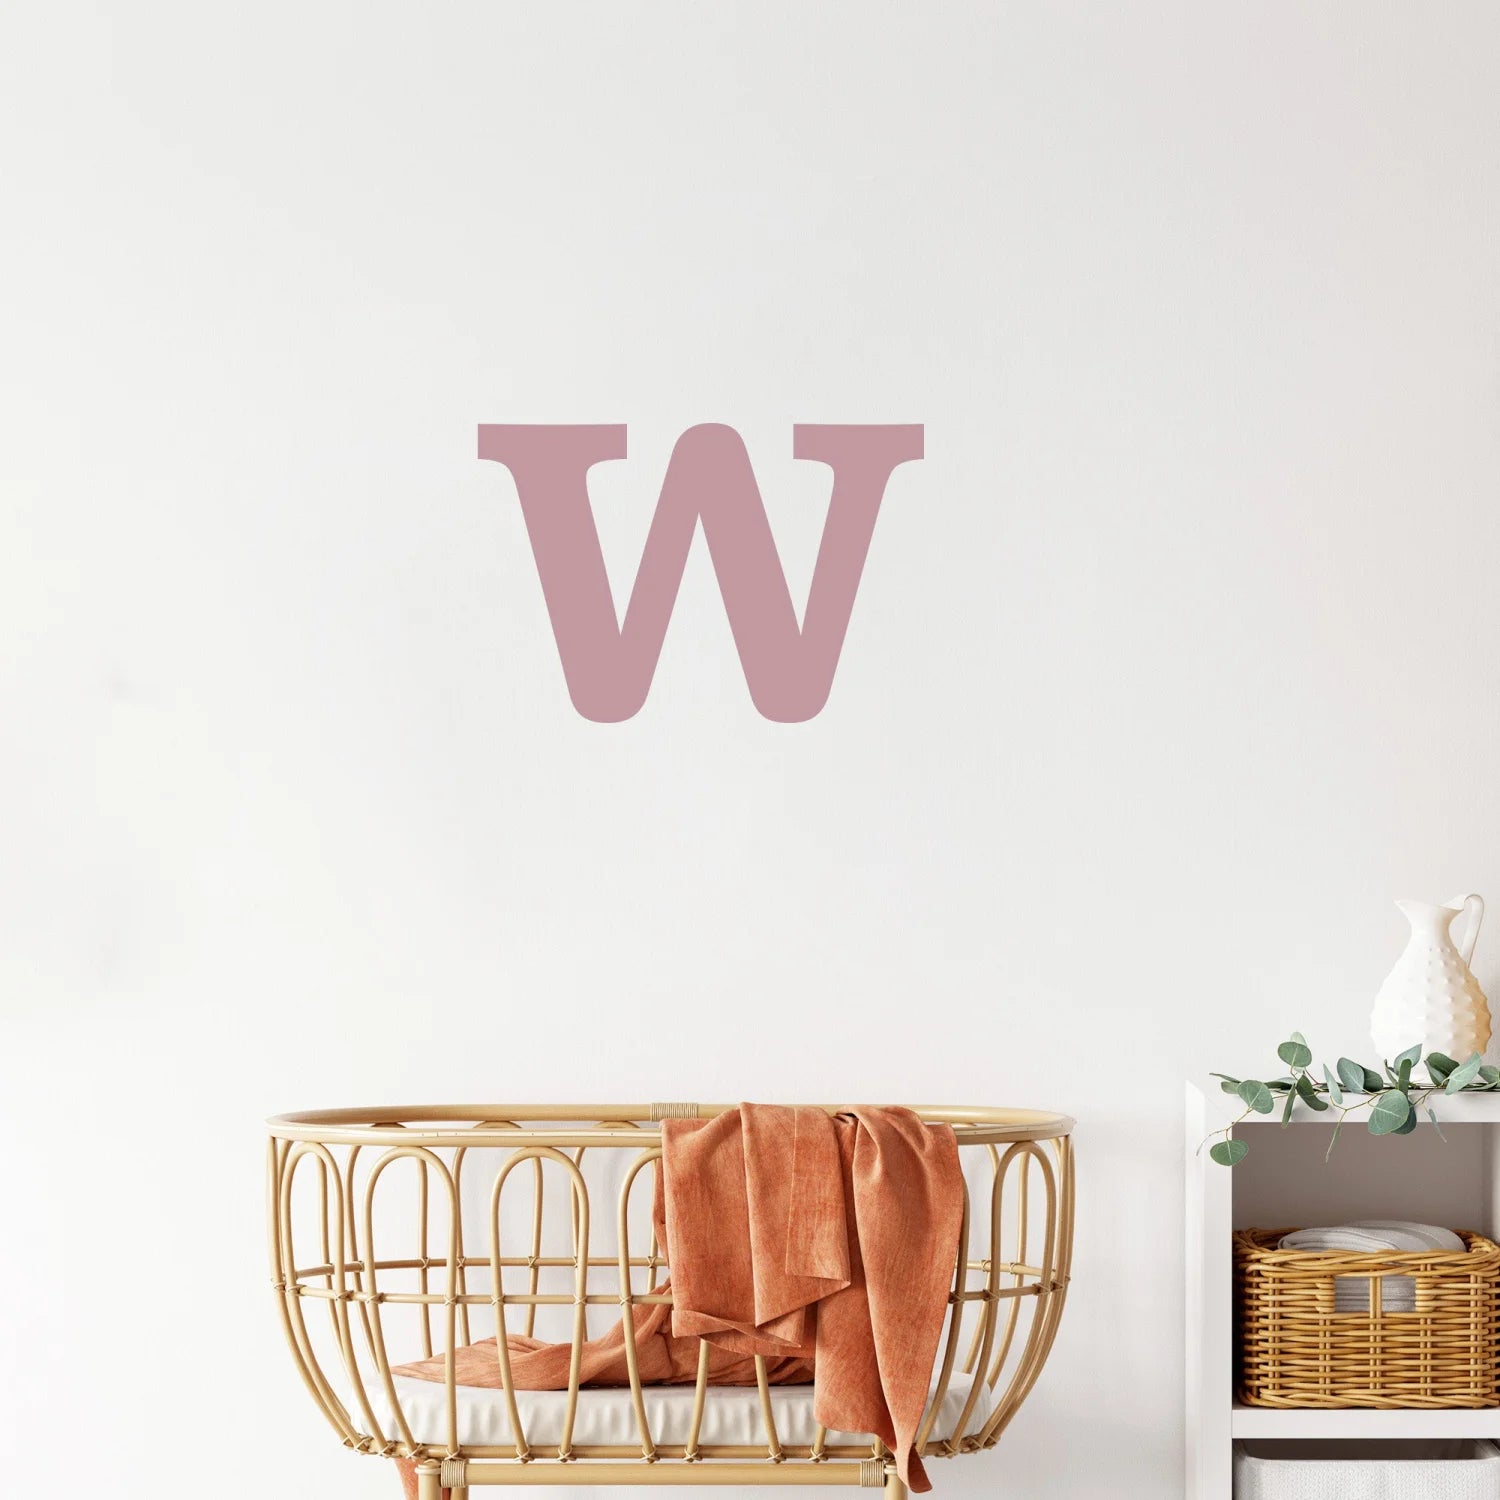 Letter W Initial Decal - Decals - Initials